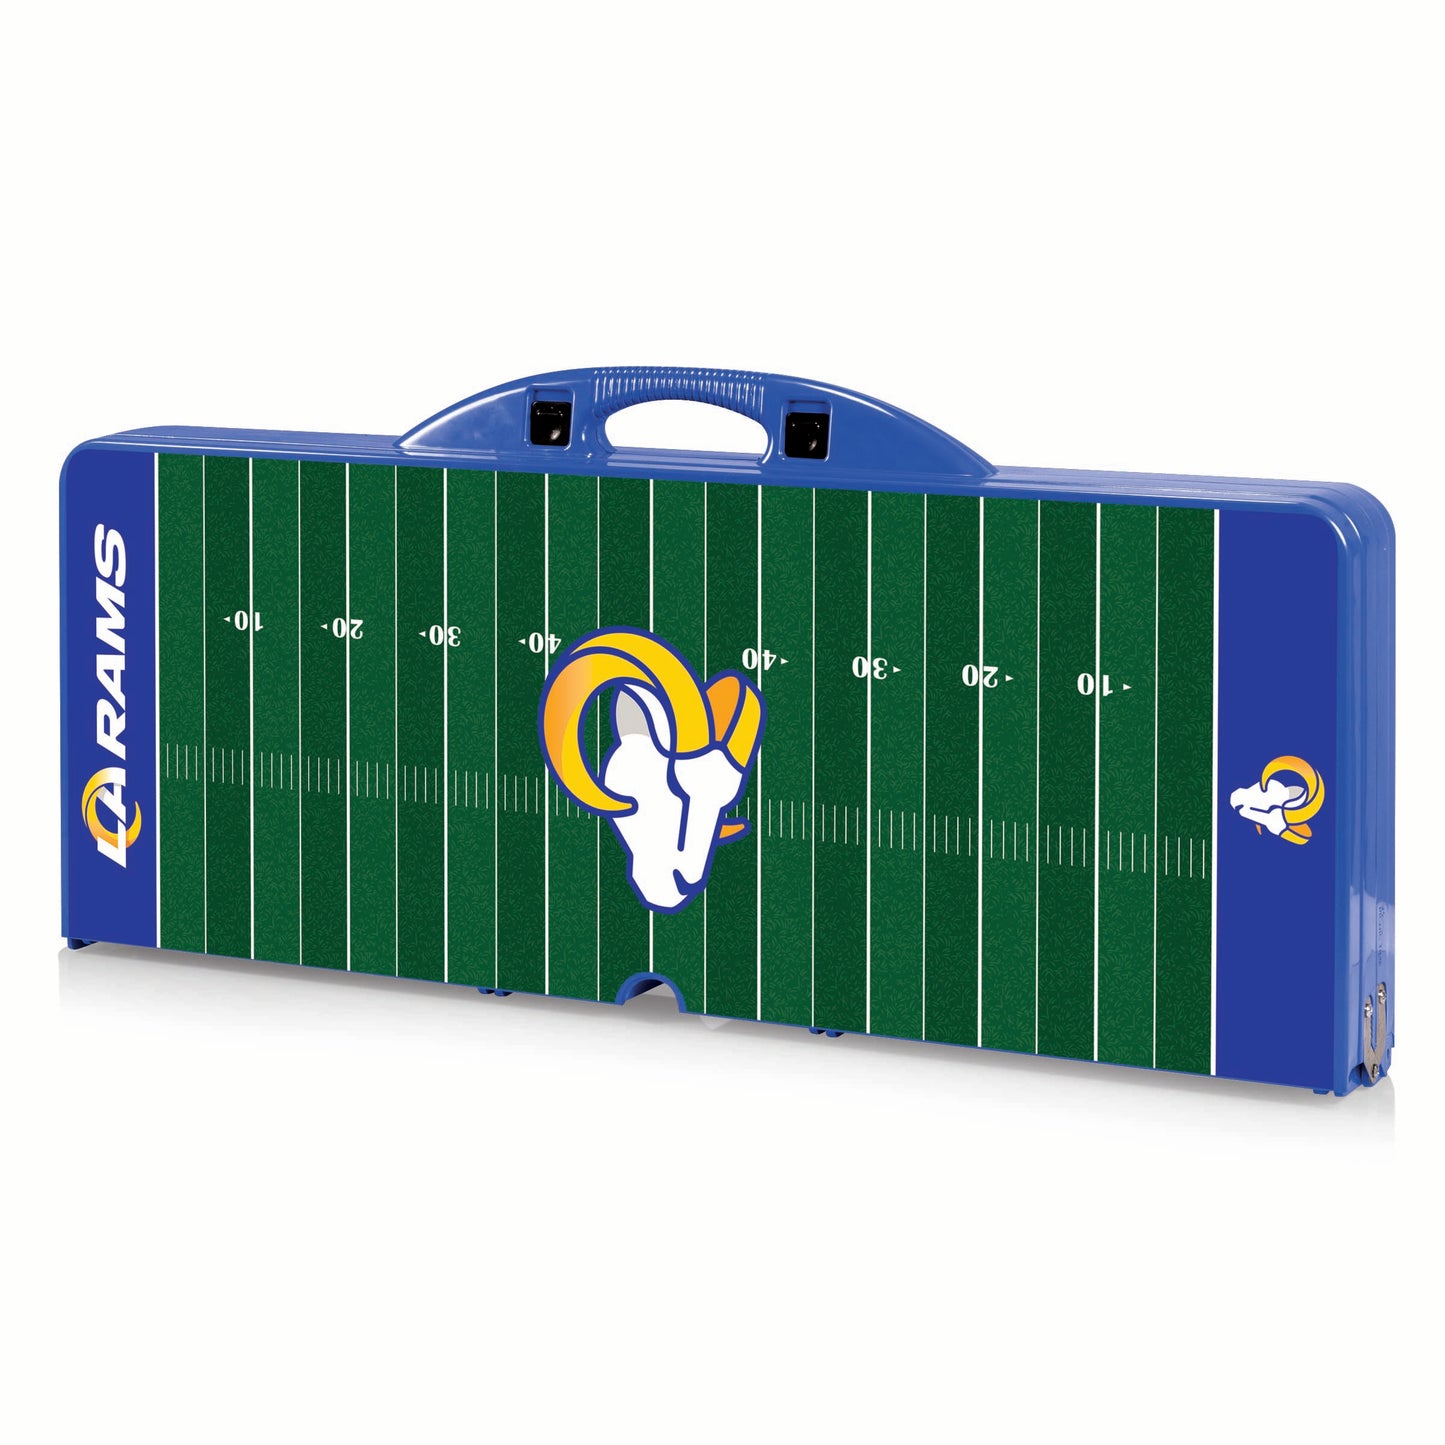 Los Angeles Rams - Picnic Table Portable Folding Table with Seats and Umbrella